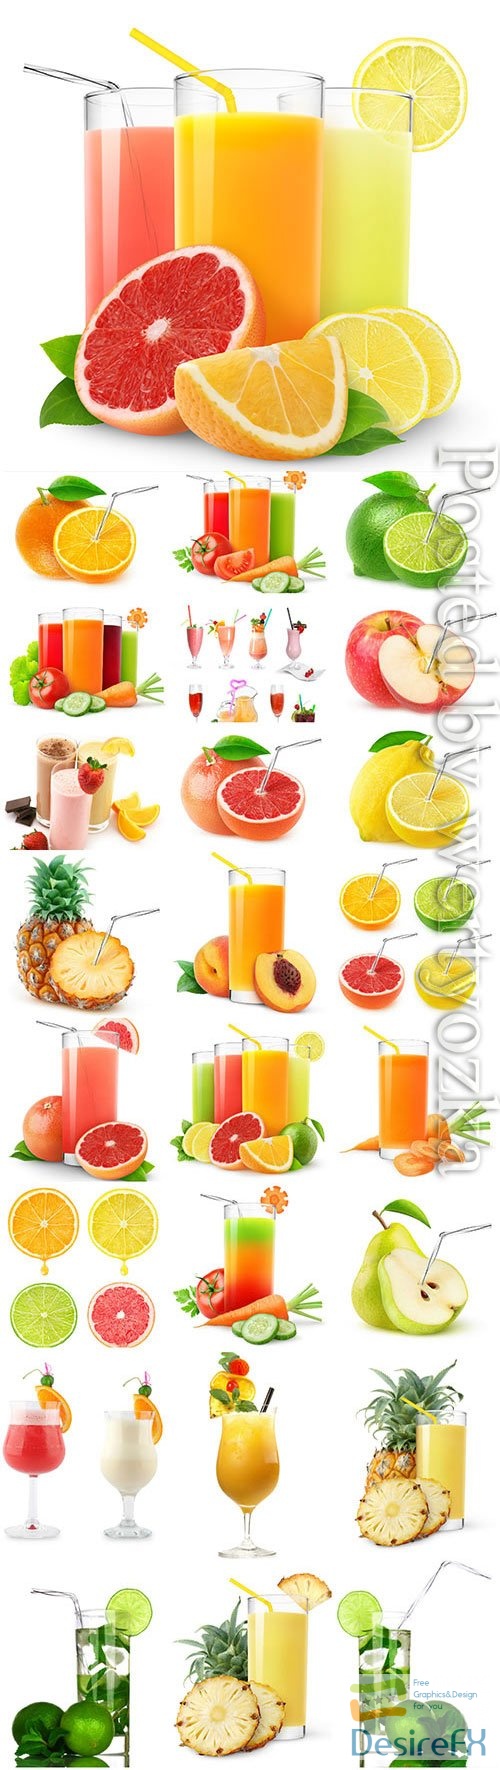 Cocktails and fresh juices stock photo